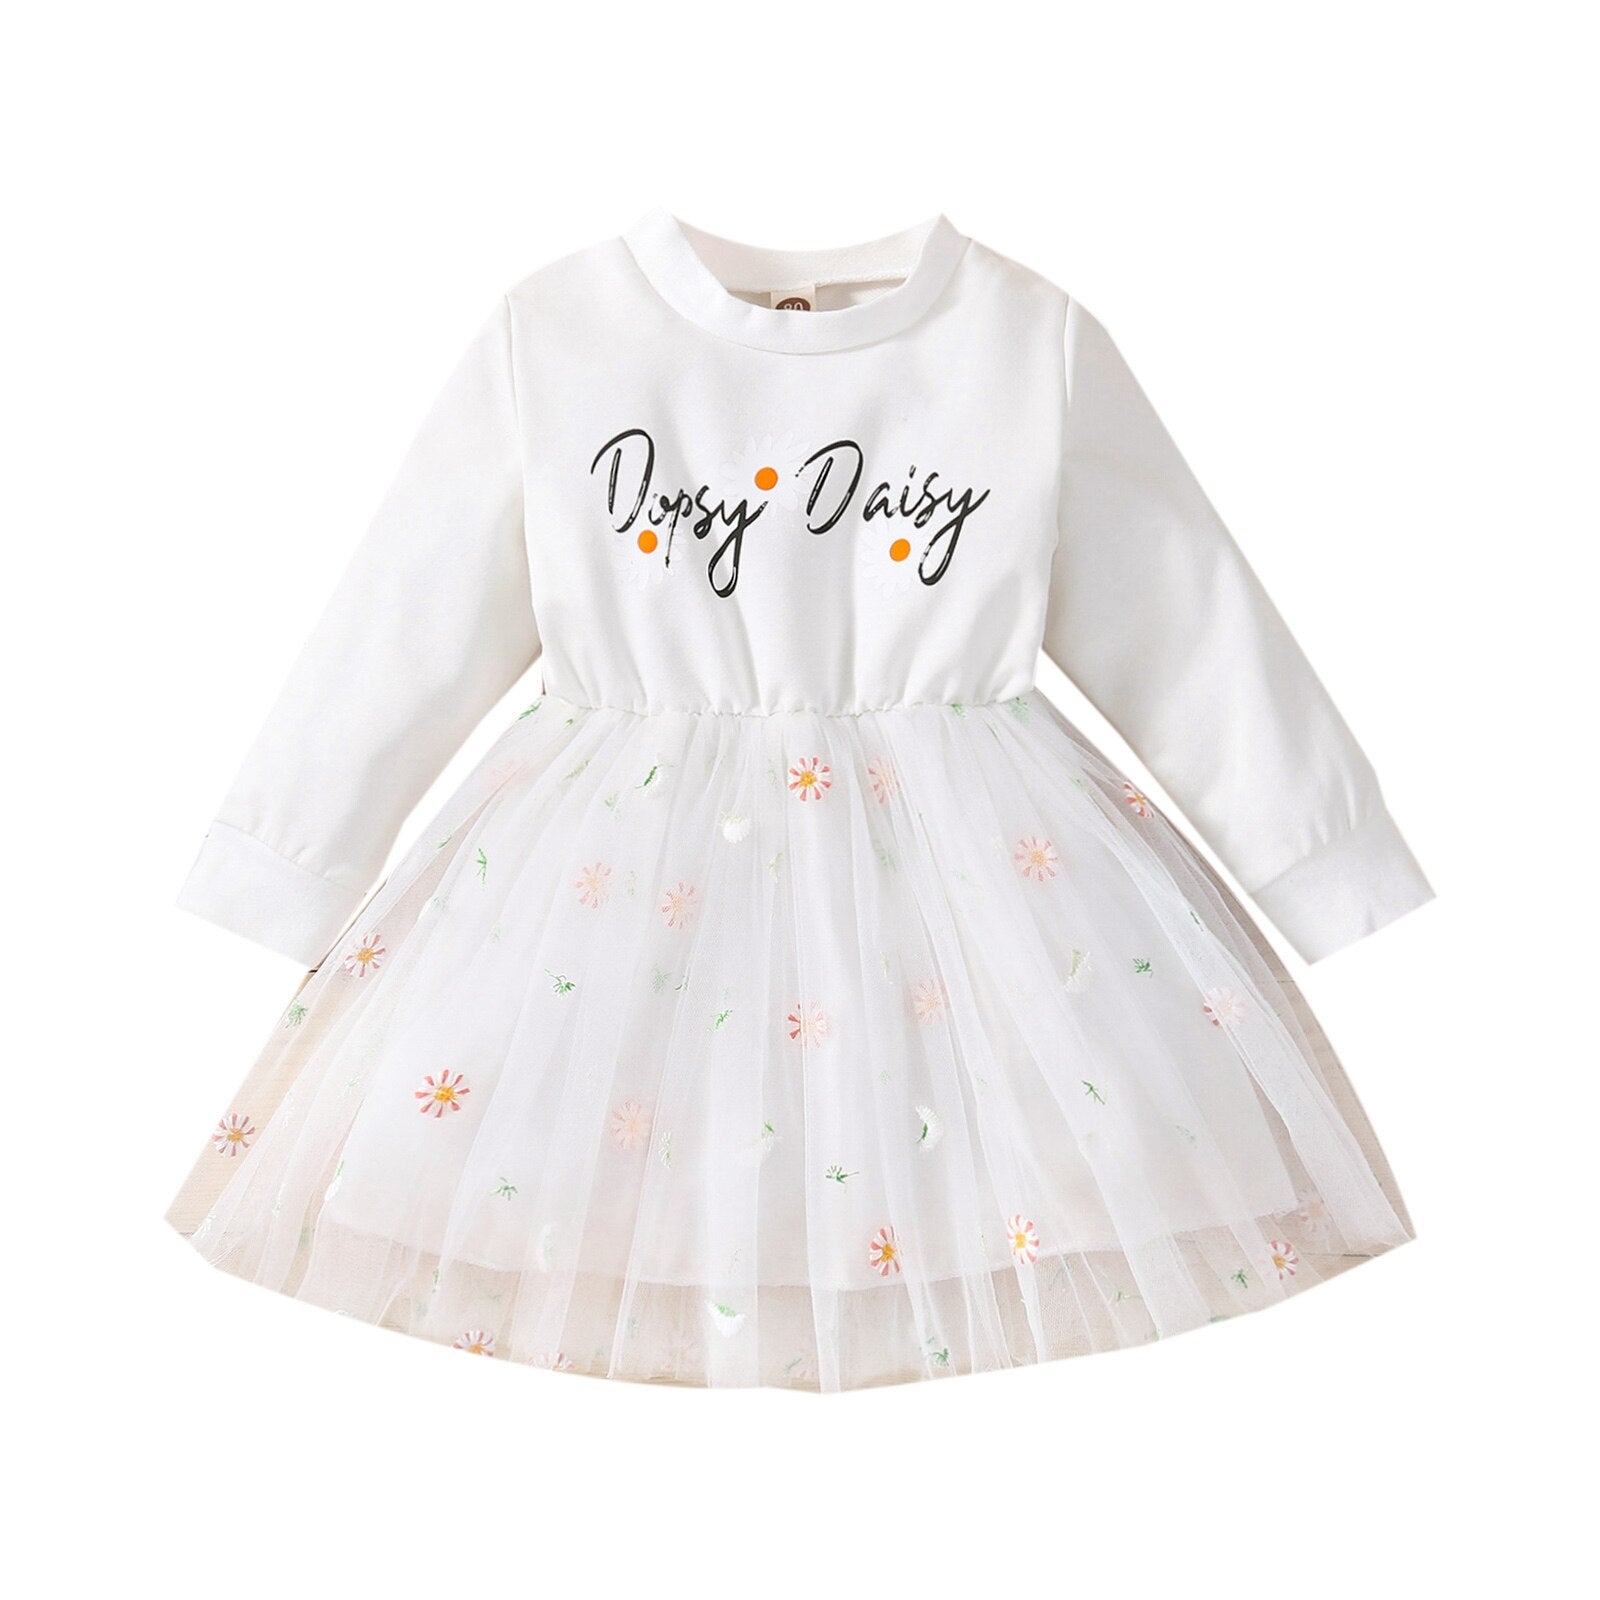 Adorable Infant Baby Girl Sweet Dress for Autumn